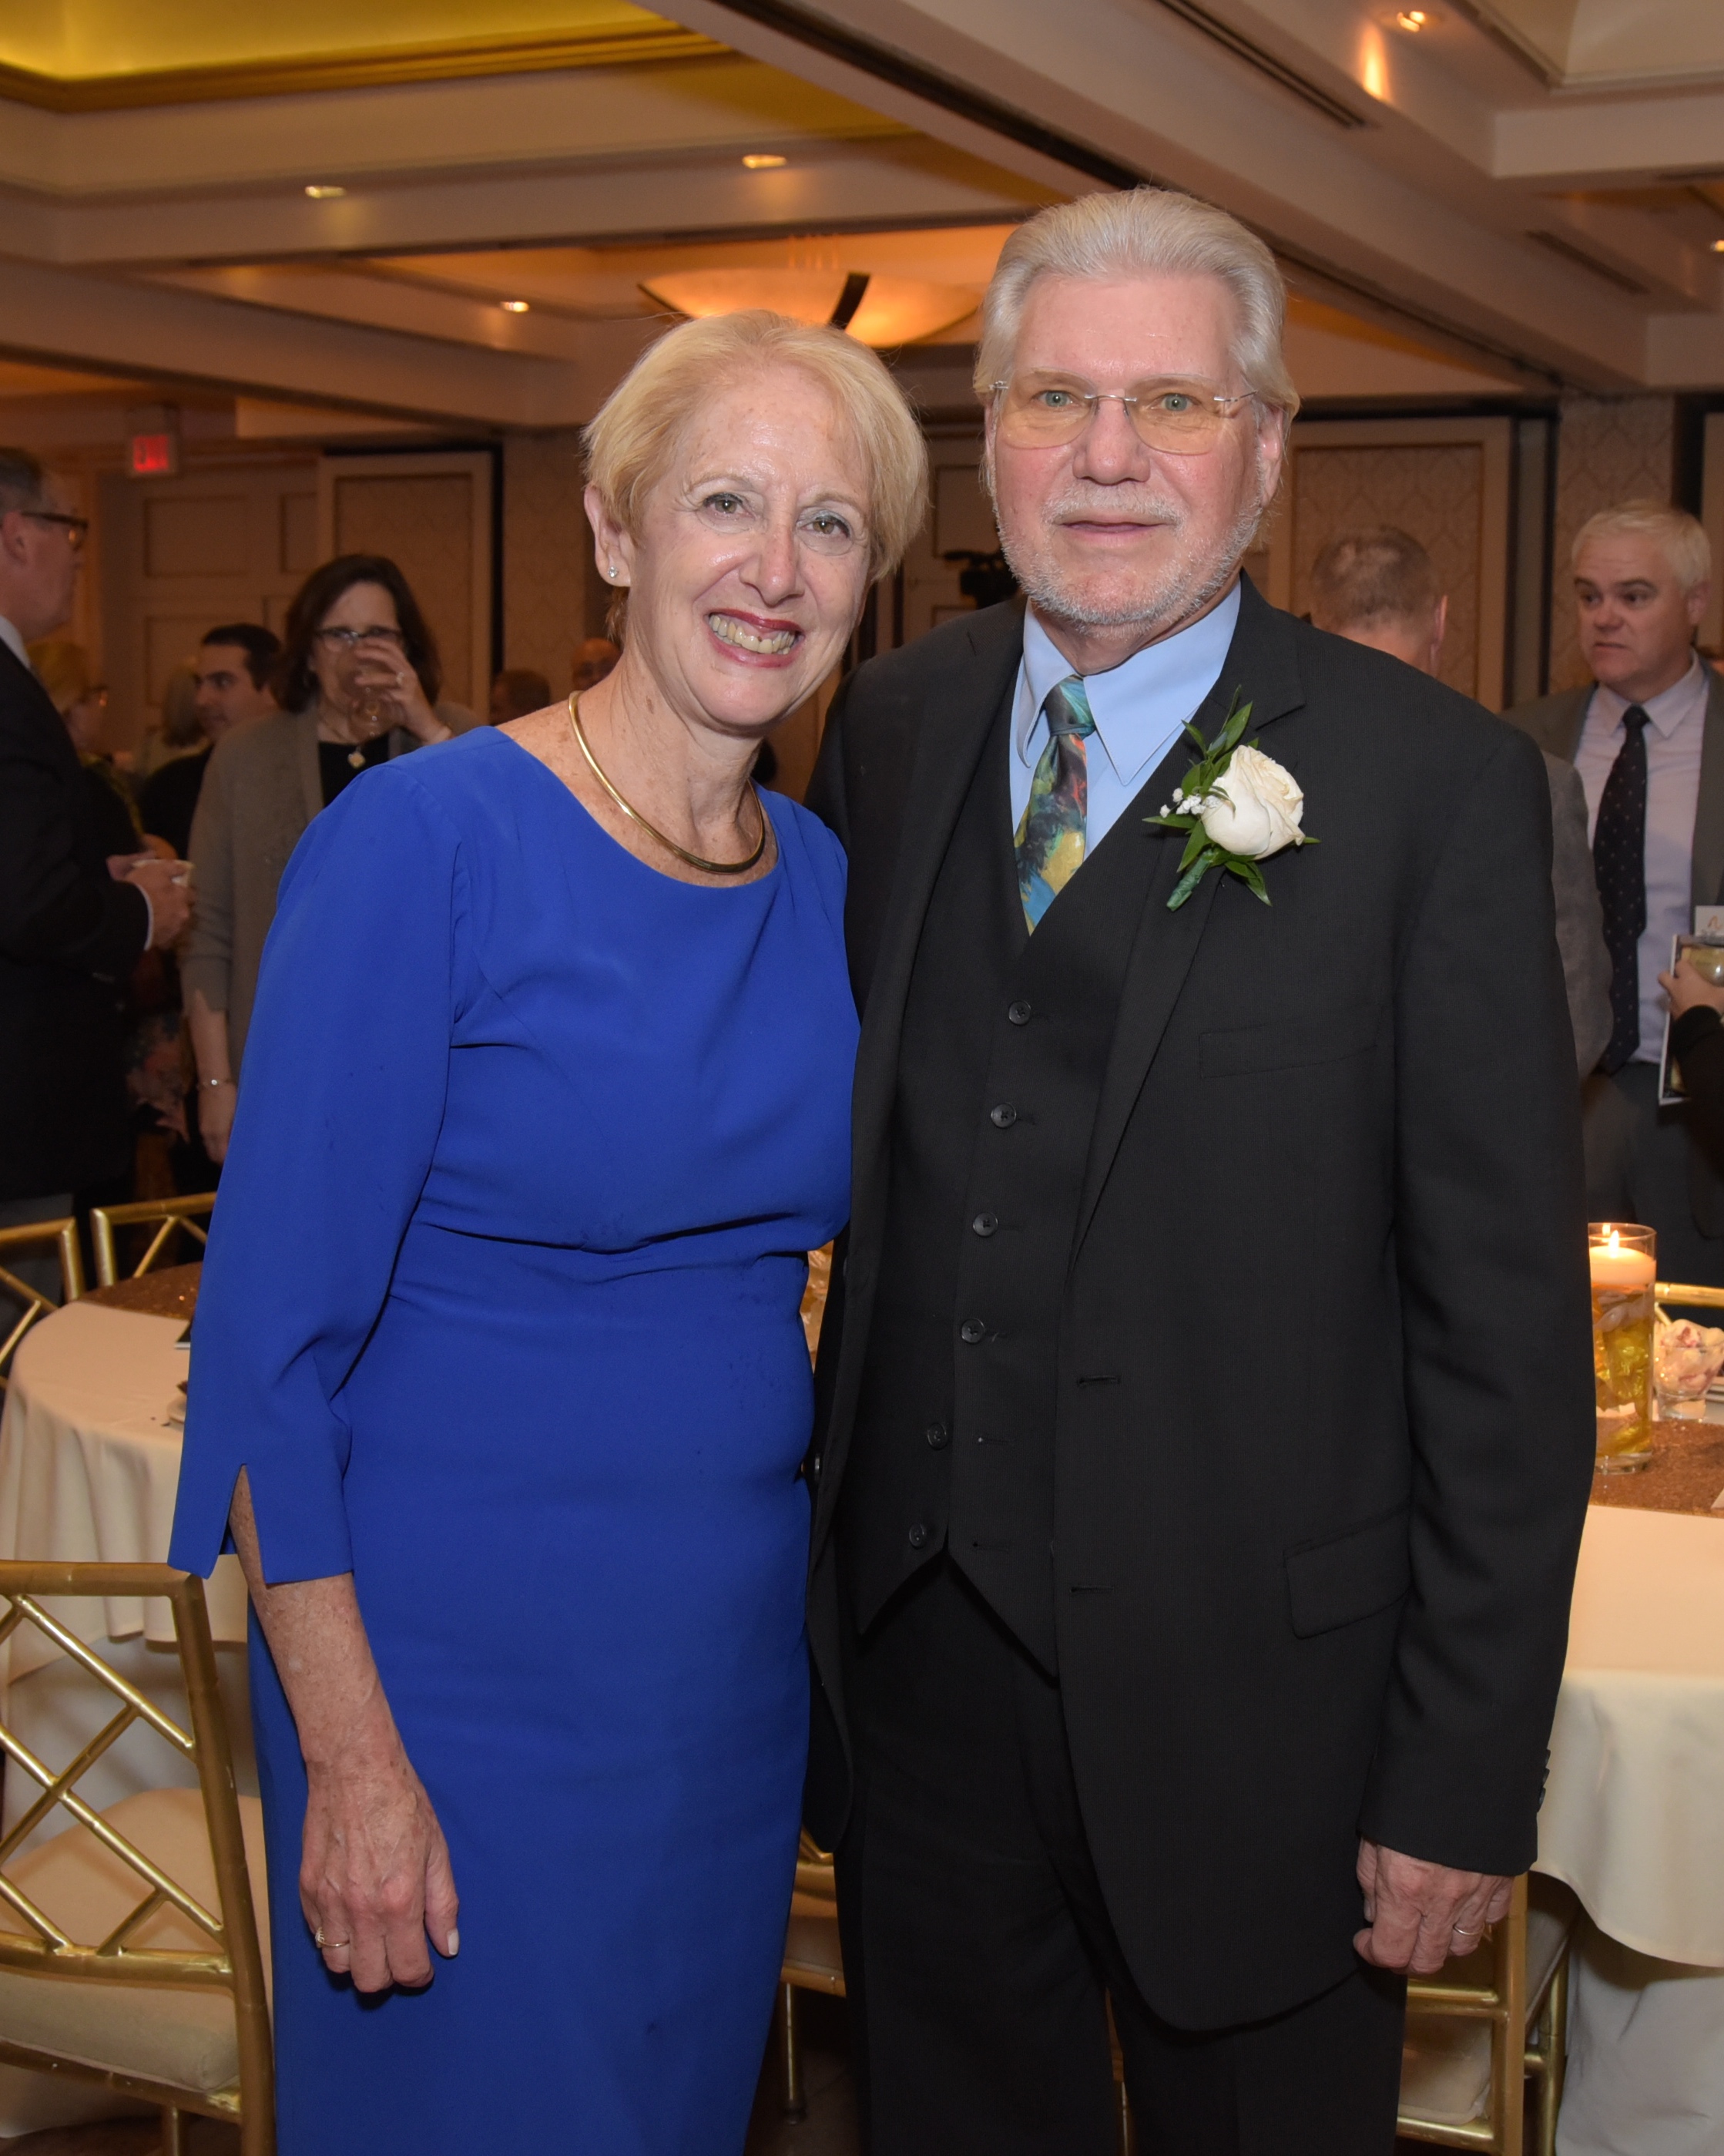 Dr. Marsha Gordon, President & CEO of the Business Council of Westchester, and Ric Swierat, honoree and Arc of Westchester Executive Director